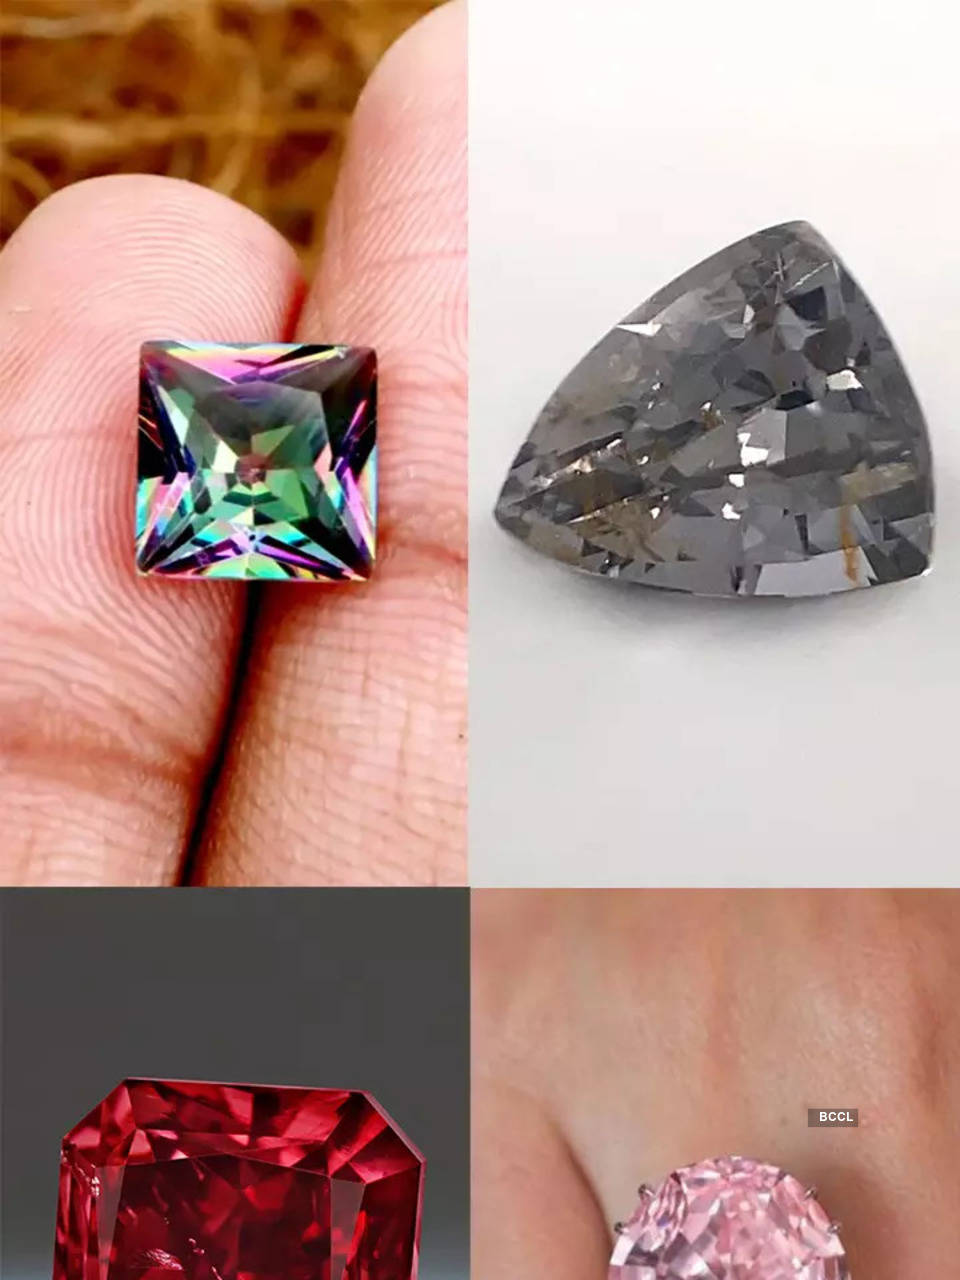 Top 10 Most Expensive Gemstones in the World